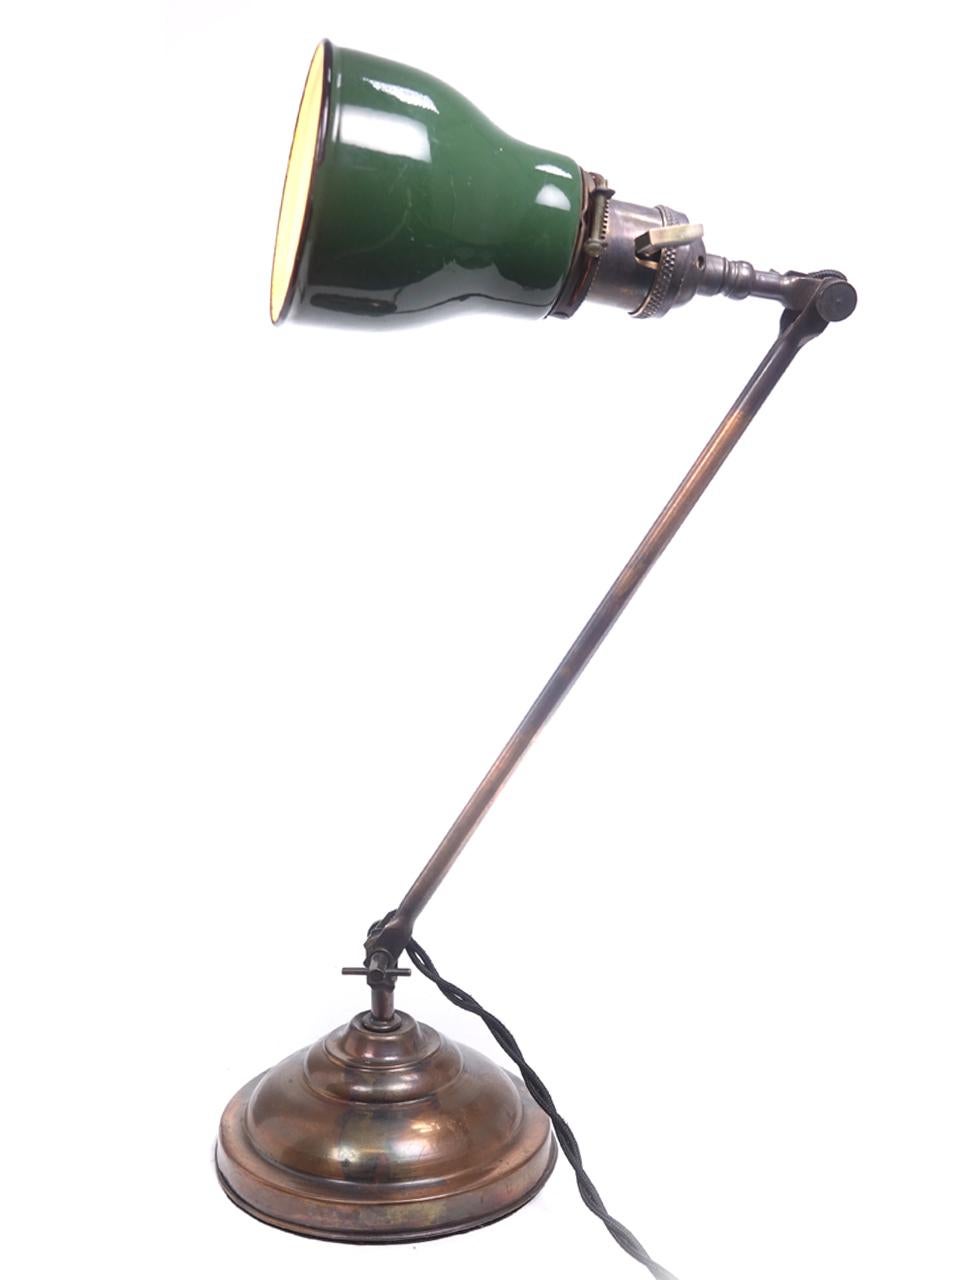 This is a beautiful matching pair of Industrial lamps by the Faires Lighting Company. Both have the original Japanned copper or black finish and mini green over white porcelain coated shades.